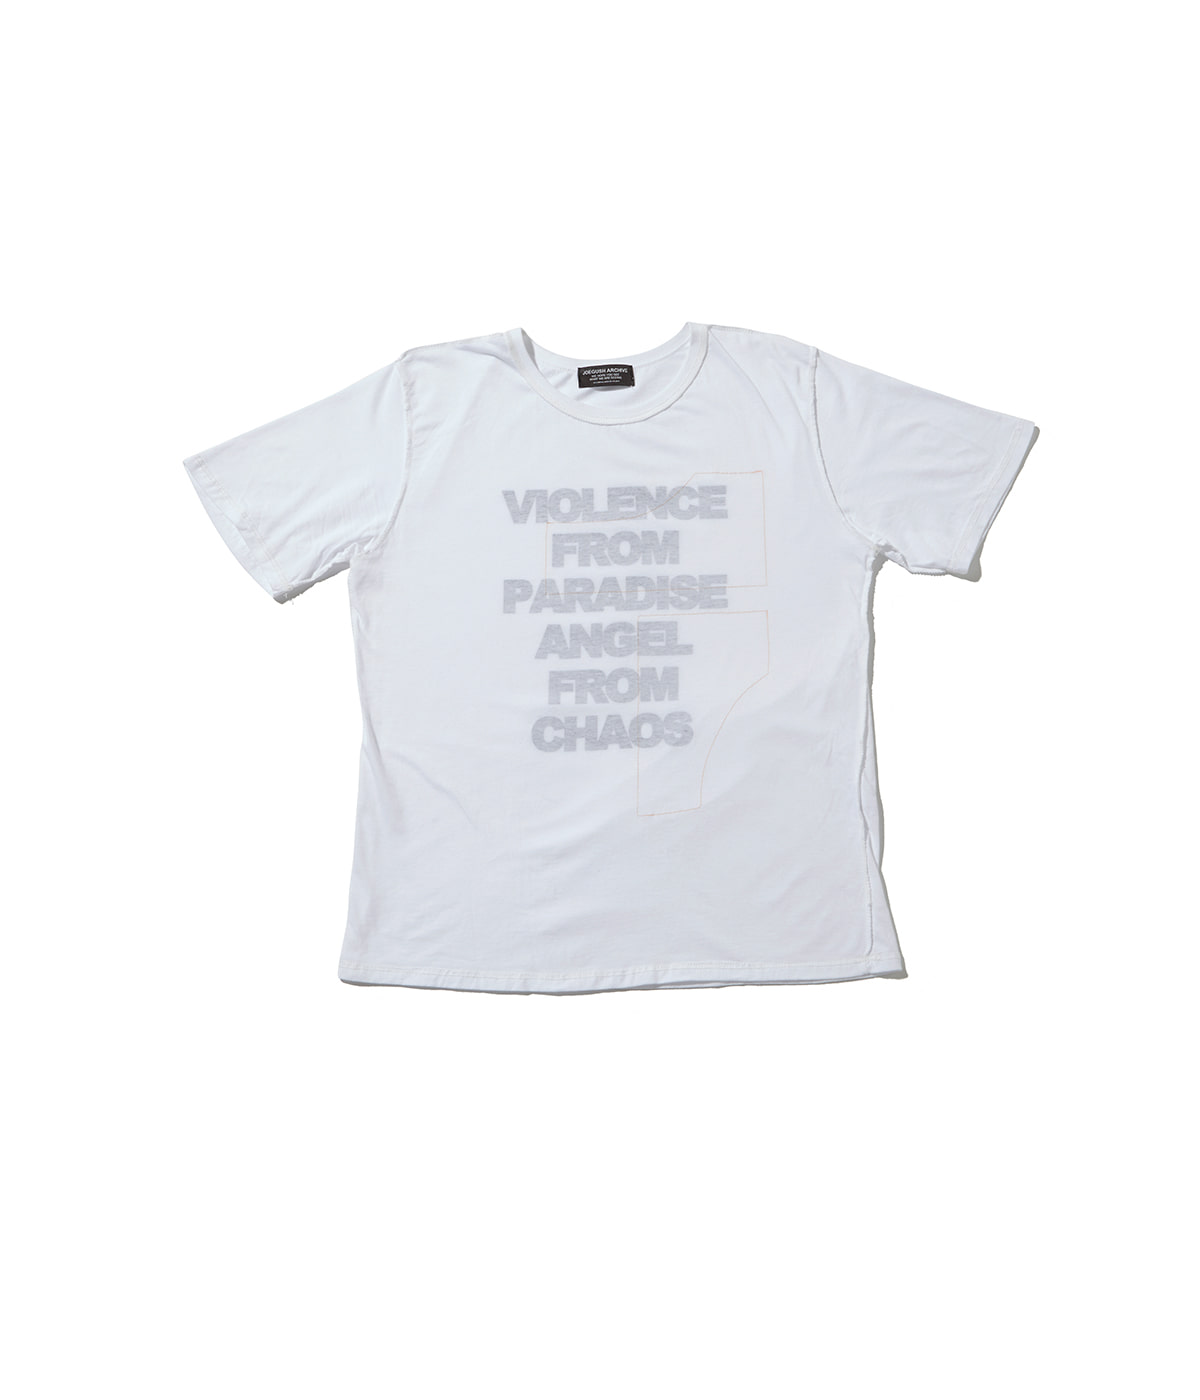 Inside-out stitched tshirts (White)